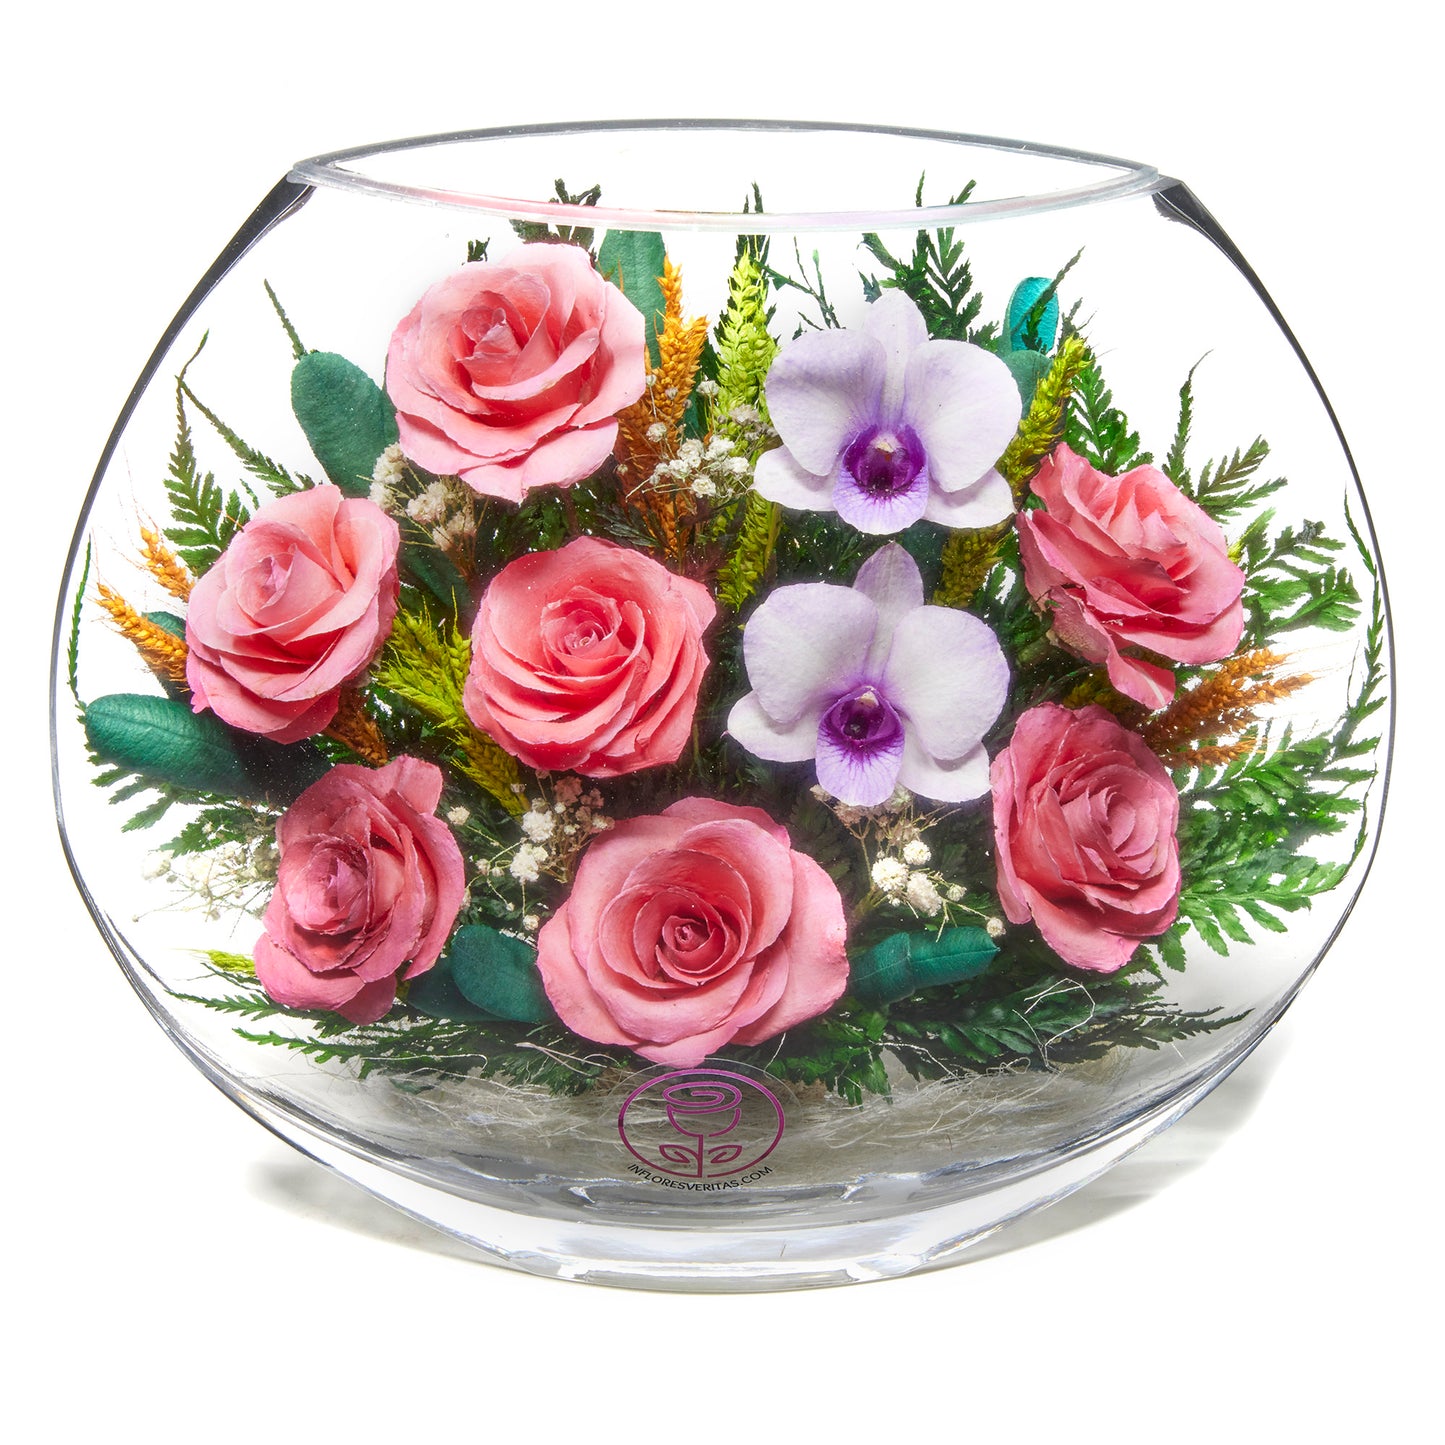 In Flores Veritas: Pink Rose Serenity Ellipse Vase - Lasts up to 5 Years - Elegant Gift for Any Occasion